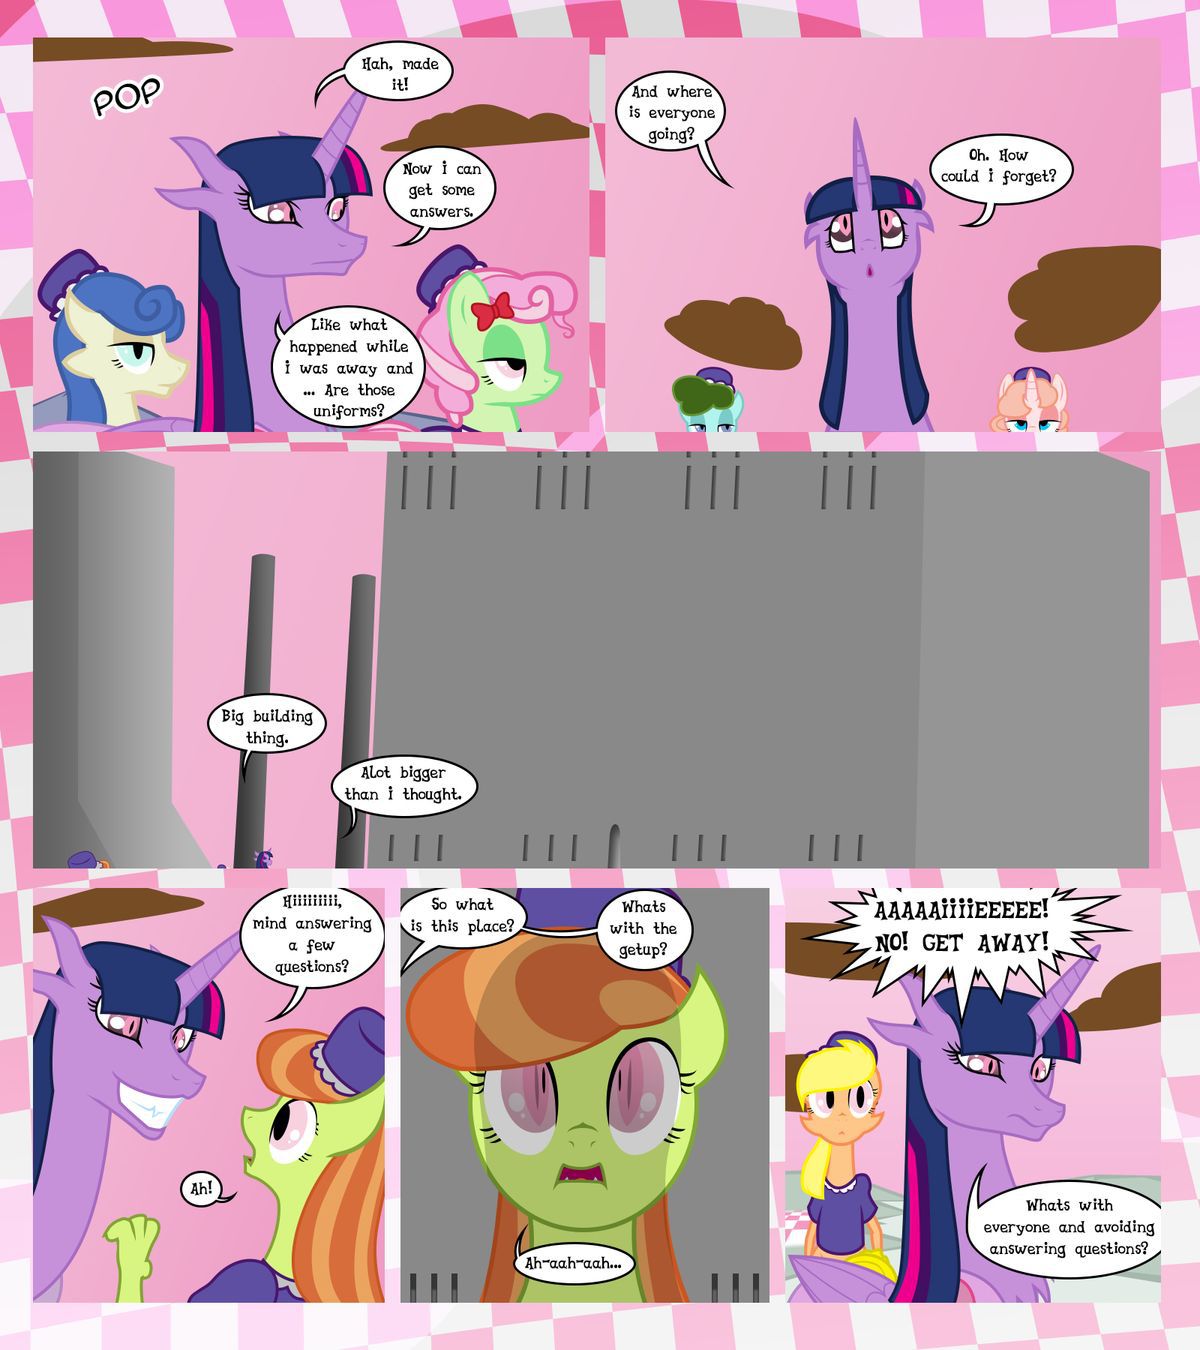 [GatesMcCloud] Cutie Mark Crusaders 10k: Chapter 3 - The Lost (My Little Pony: Friendship is Magic) [English] [Ongoing] 47